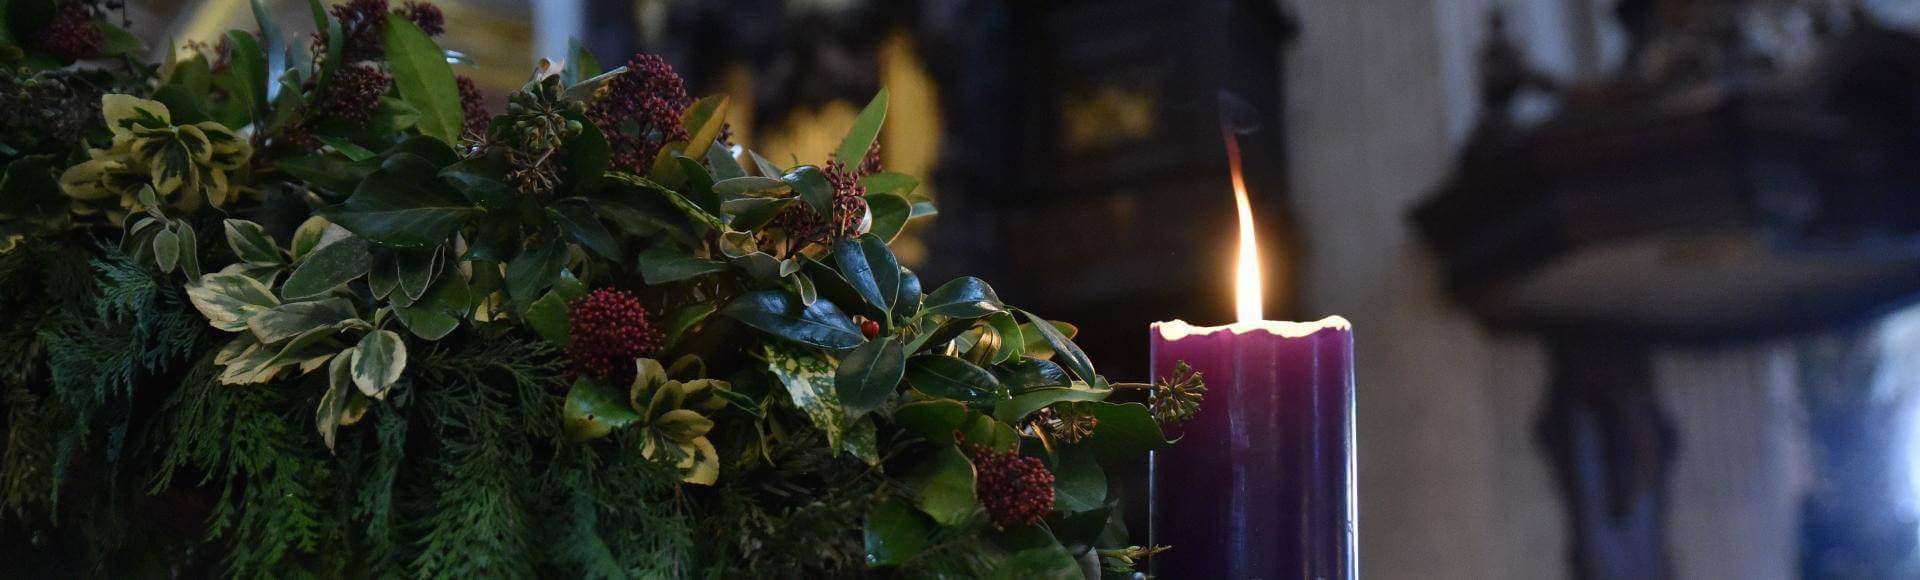 An image of a lit purple candle in the Advent wreath with the organ pipes in the background